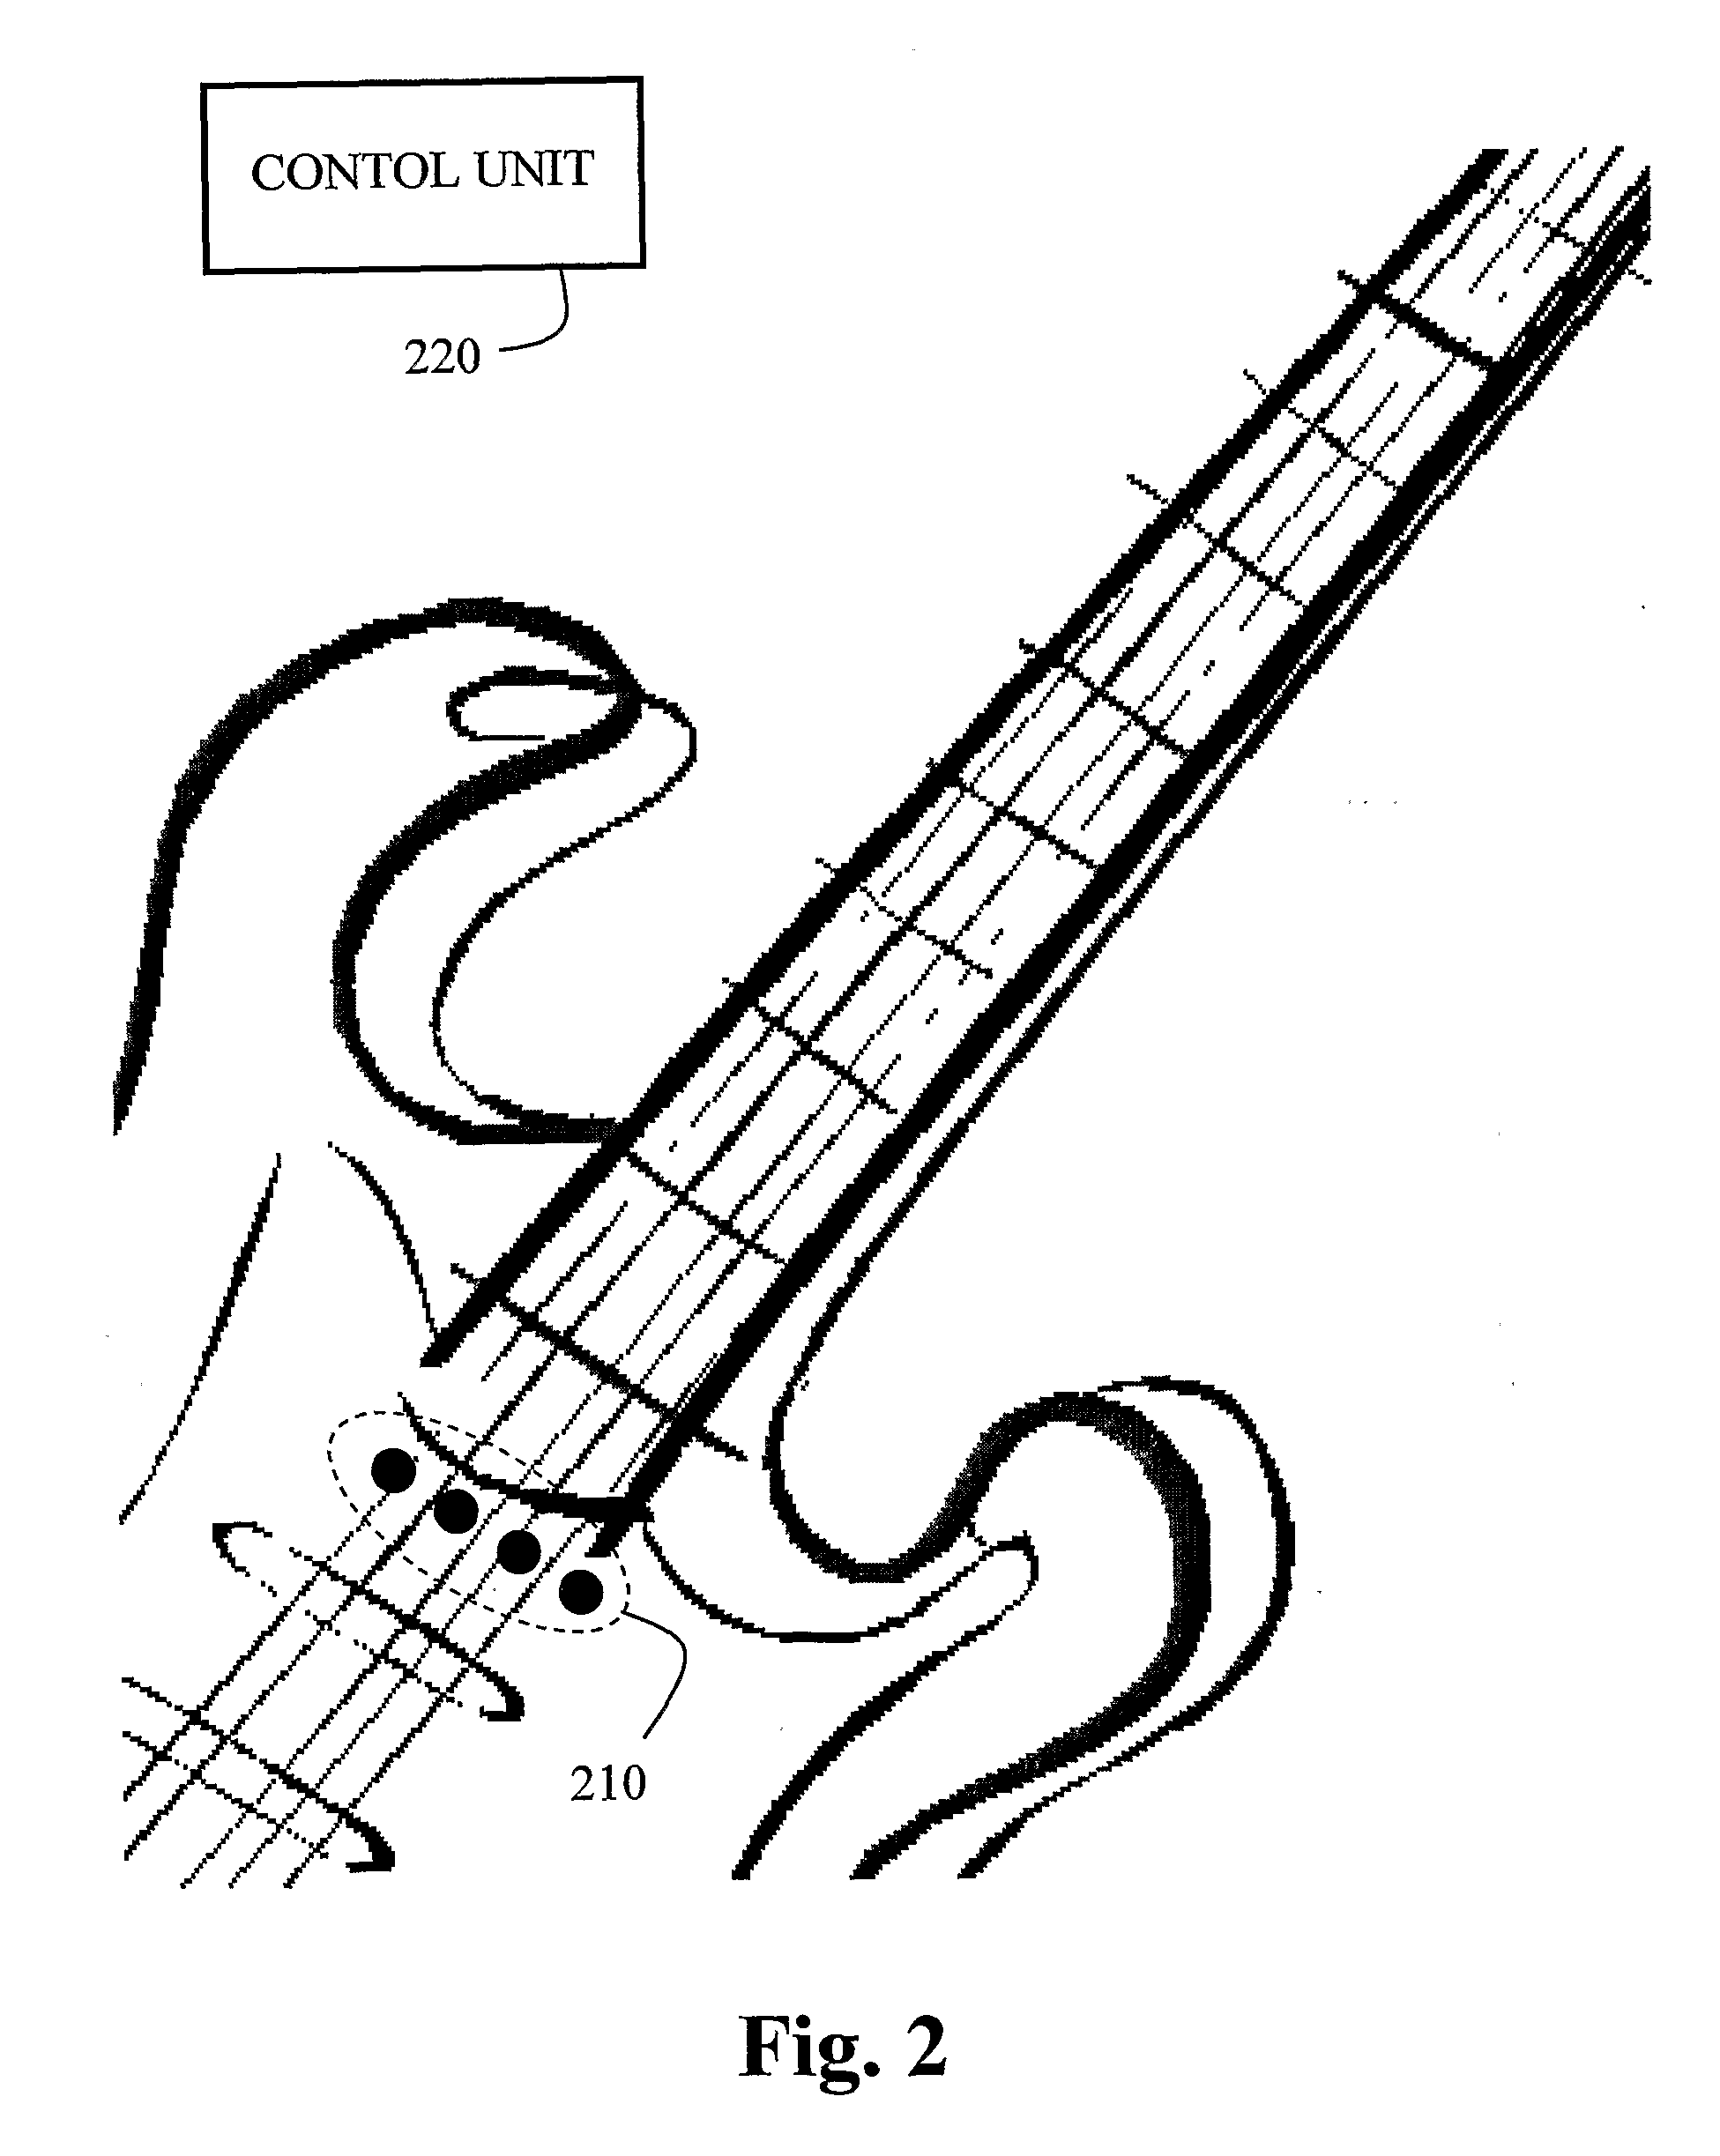 Method and System for Reproducing Sound and Producing Synthesizer Control Data from Data Collected by Sensors Coupled to a String Instrument